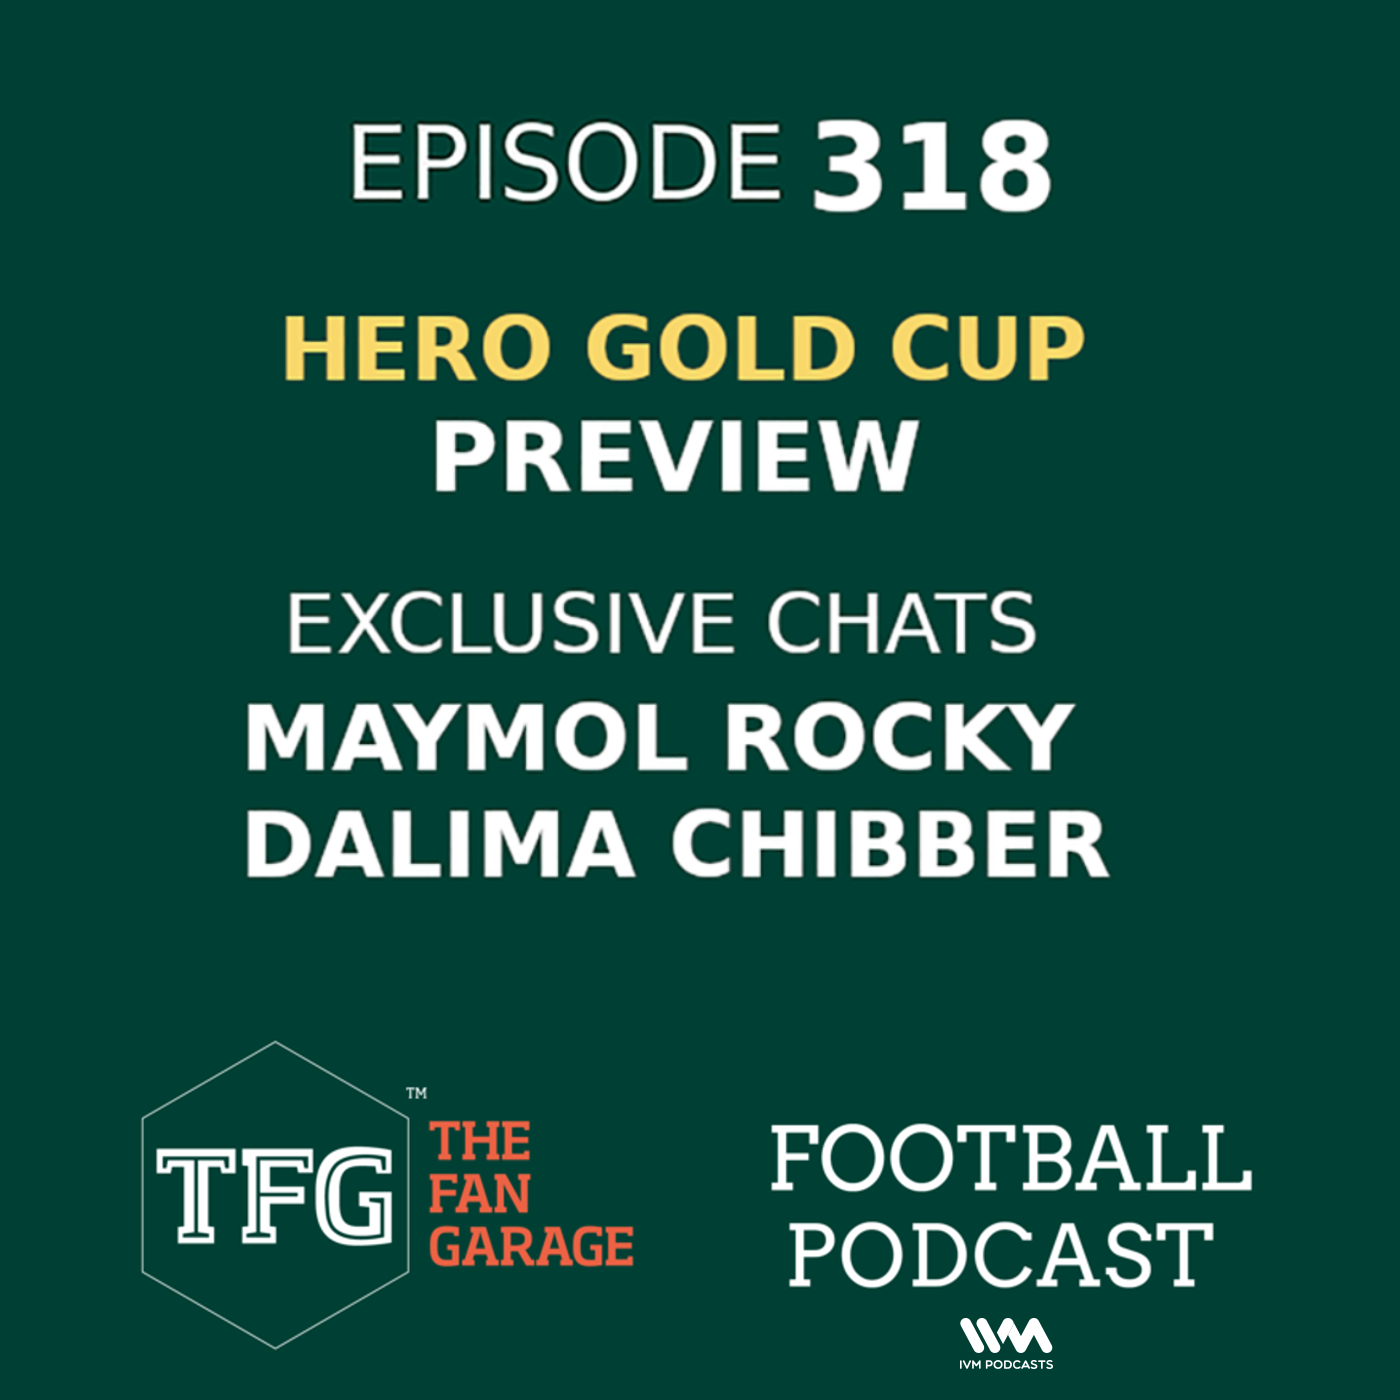 TFG Indian Football Ep. 318: Hero Gold Cup Preview (Featuring Maymol Rocky, Dalima Chibber)